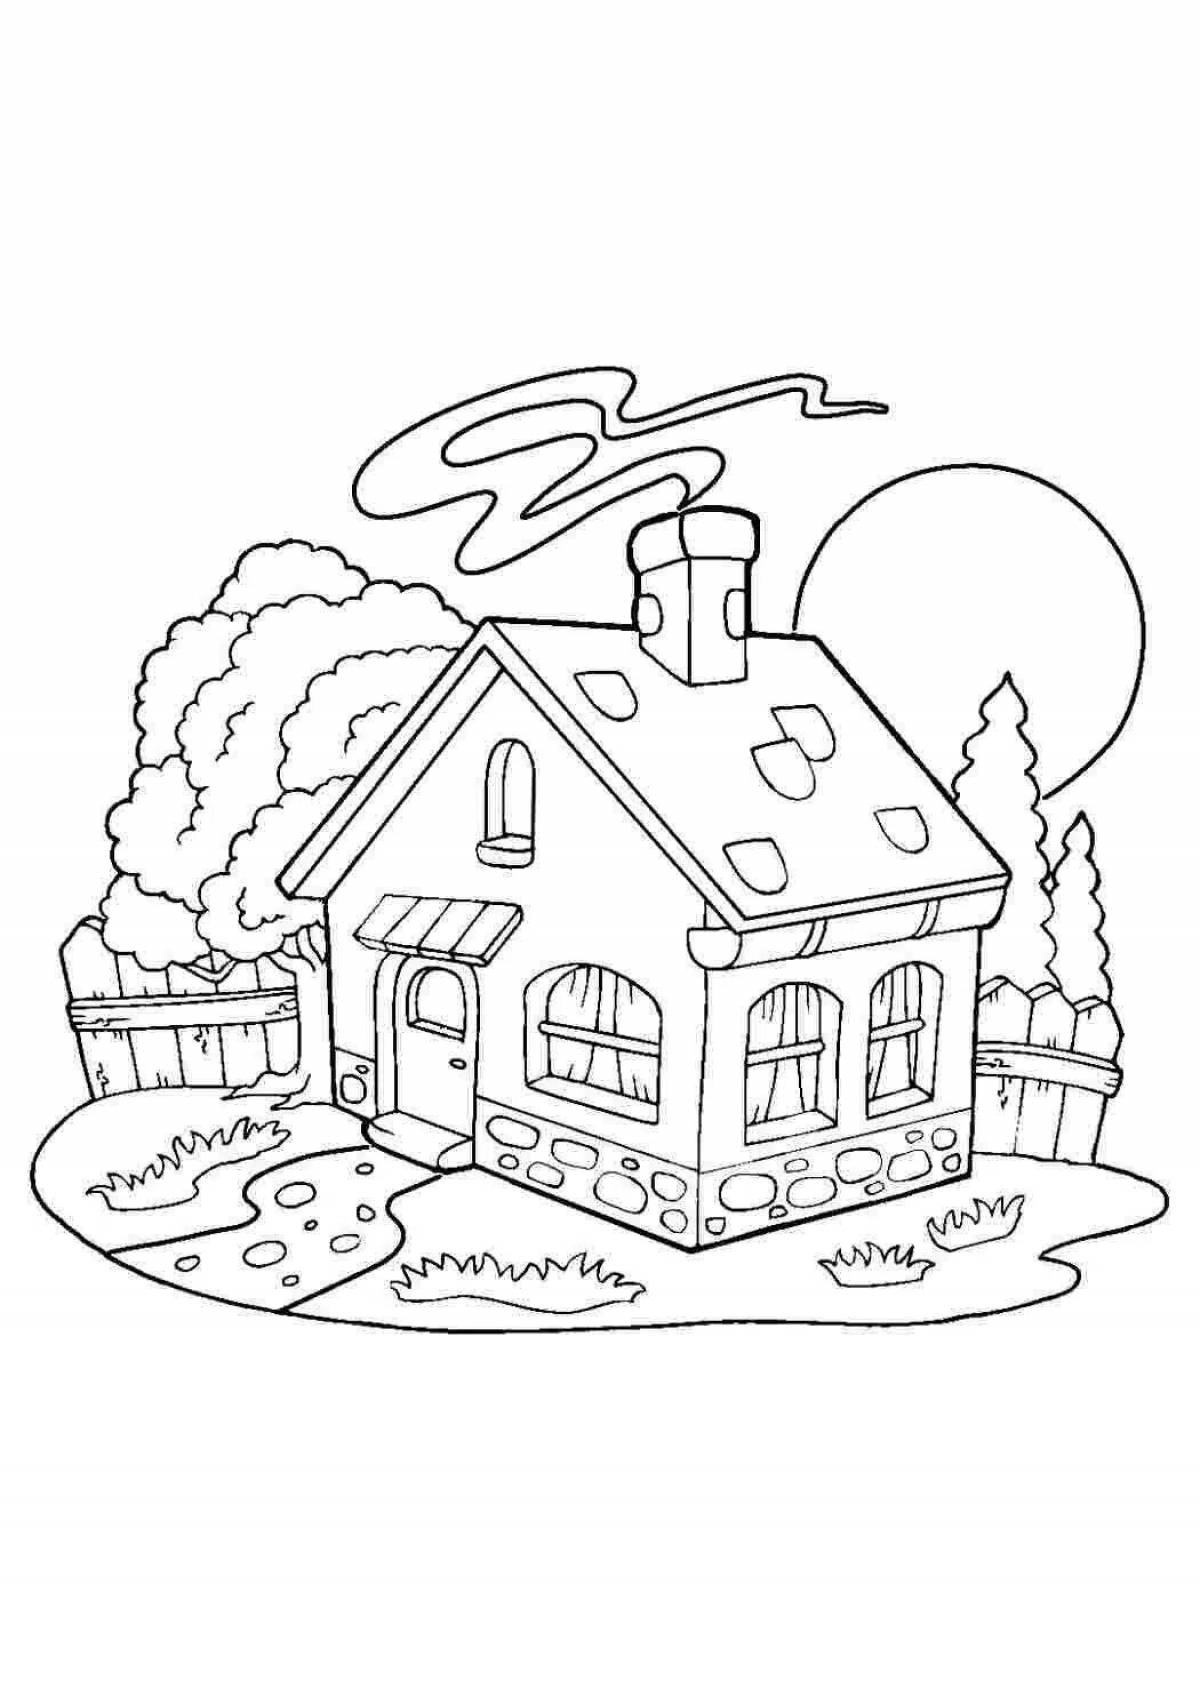 Coloring book magical educational house